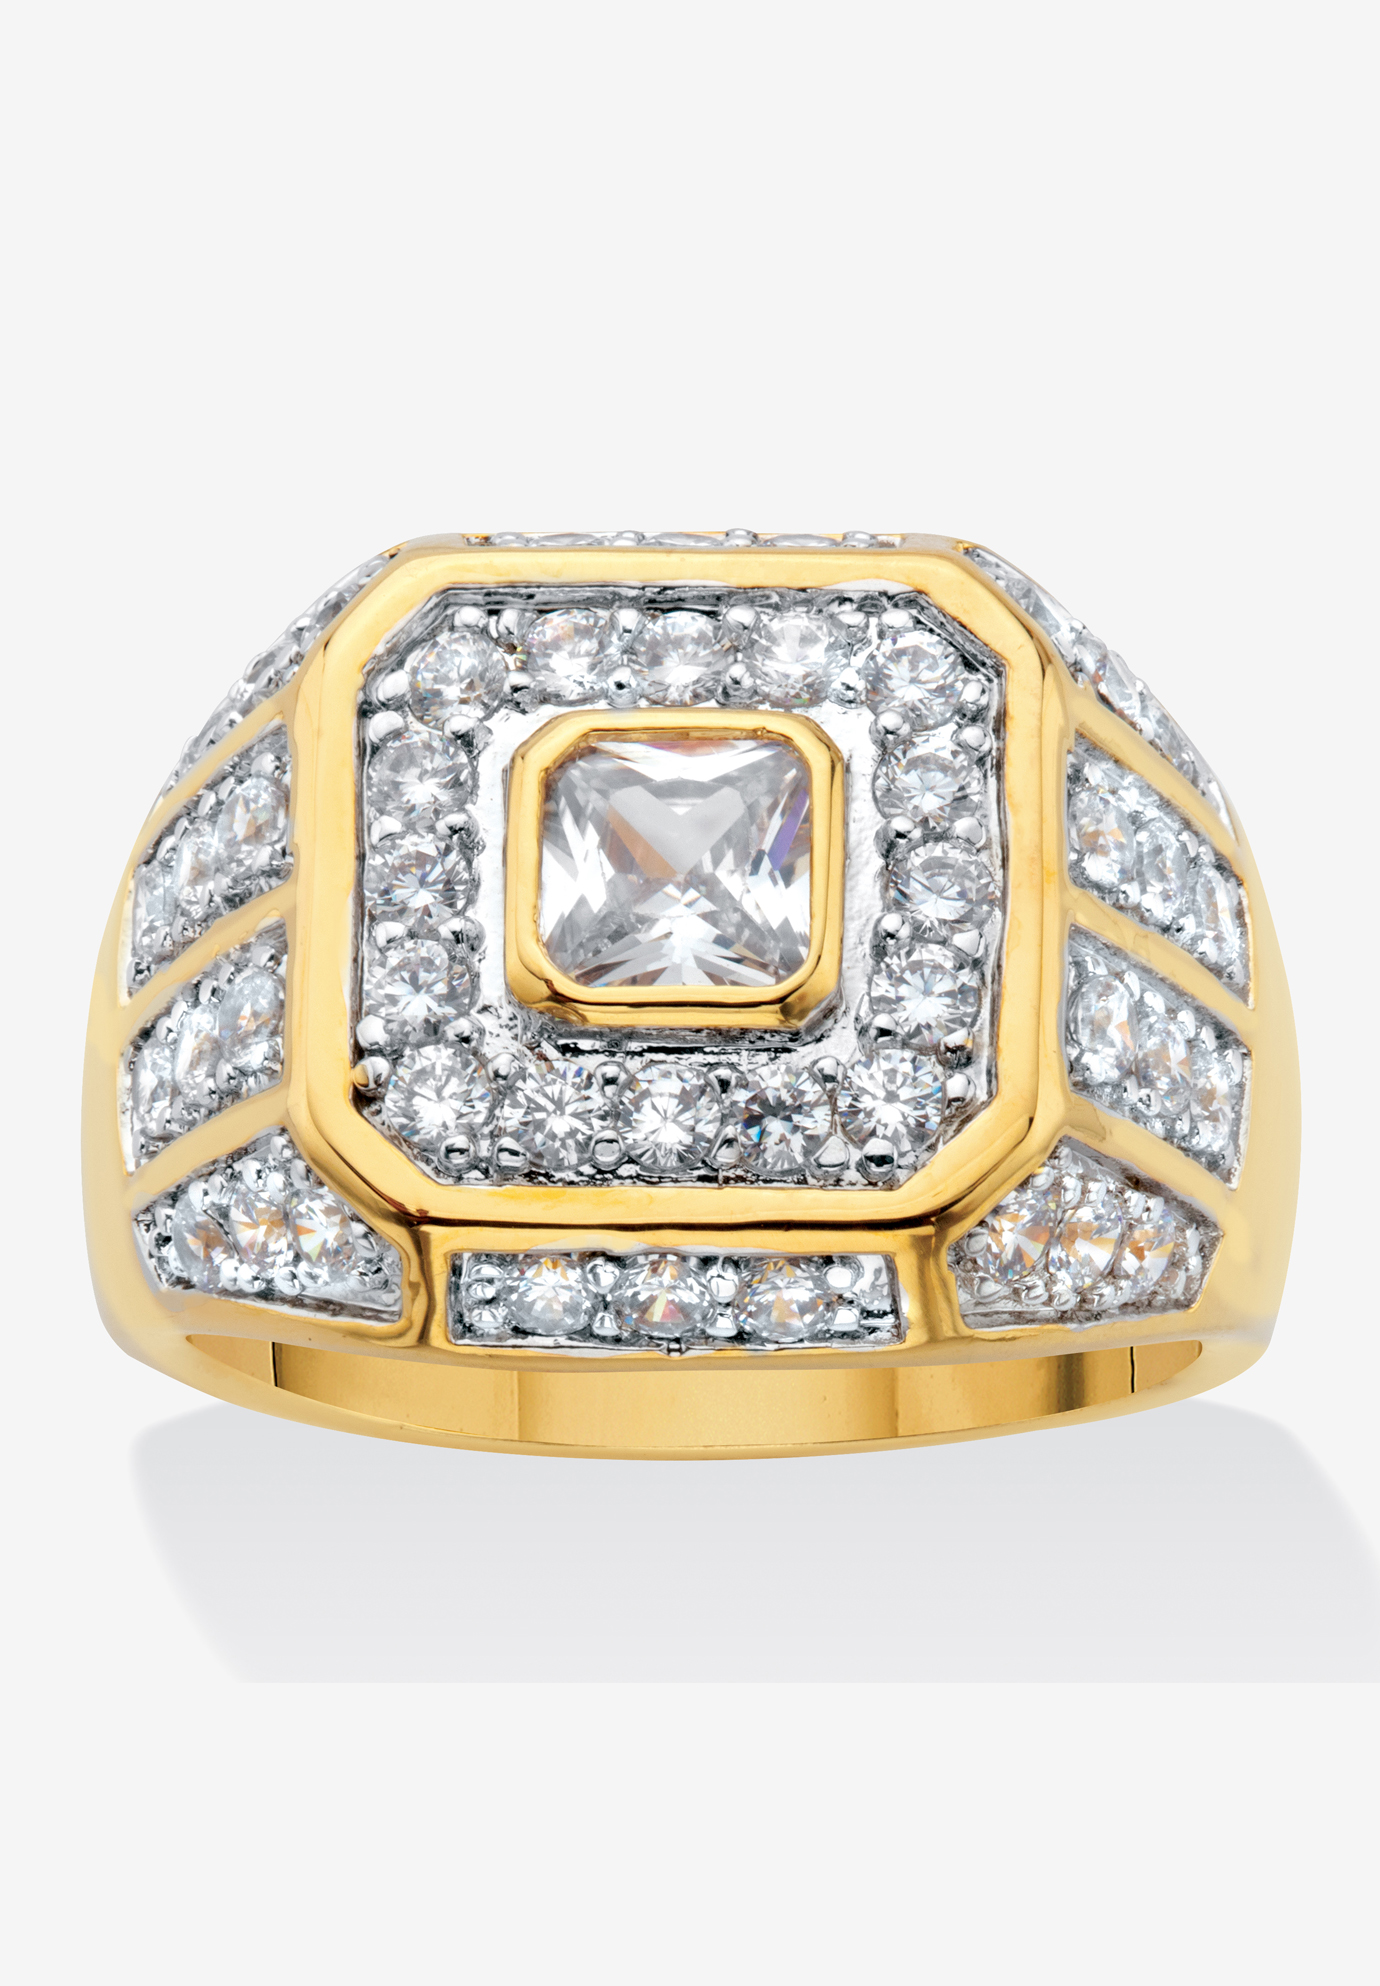 Men&apos;s Gold-Plated Square Cut Cubic Zirconia Octagon Ring (2 1/3 cttw TDW), 